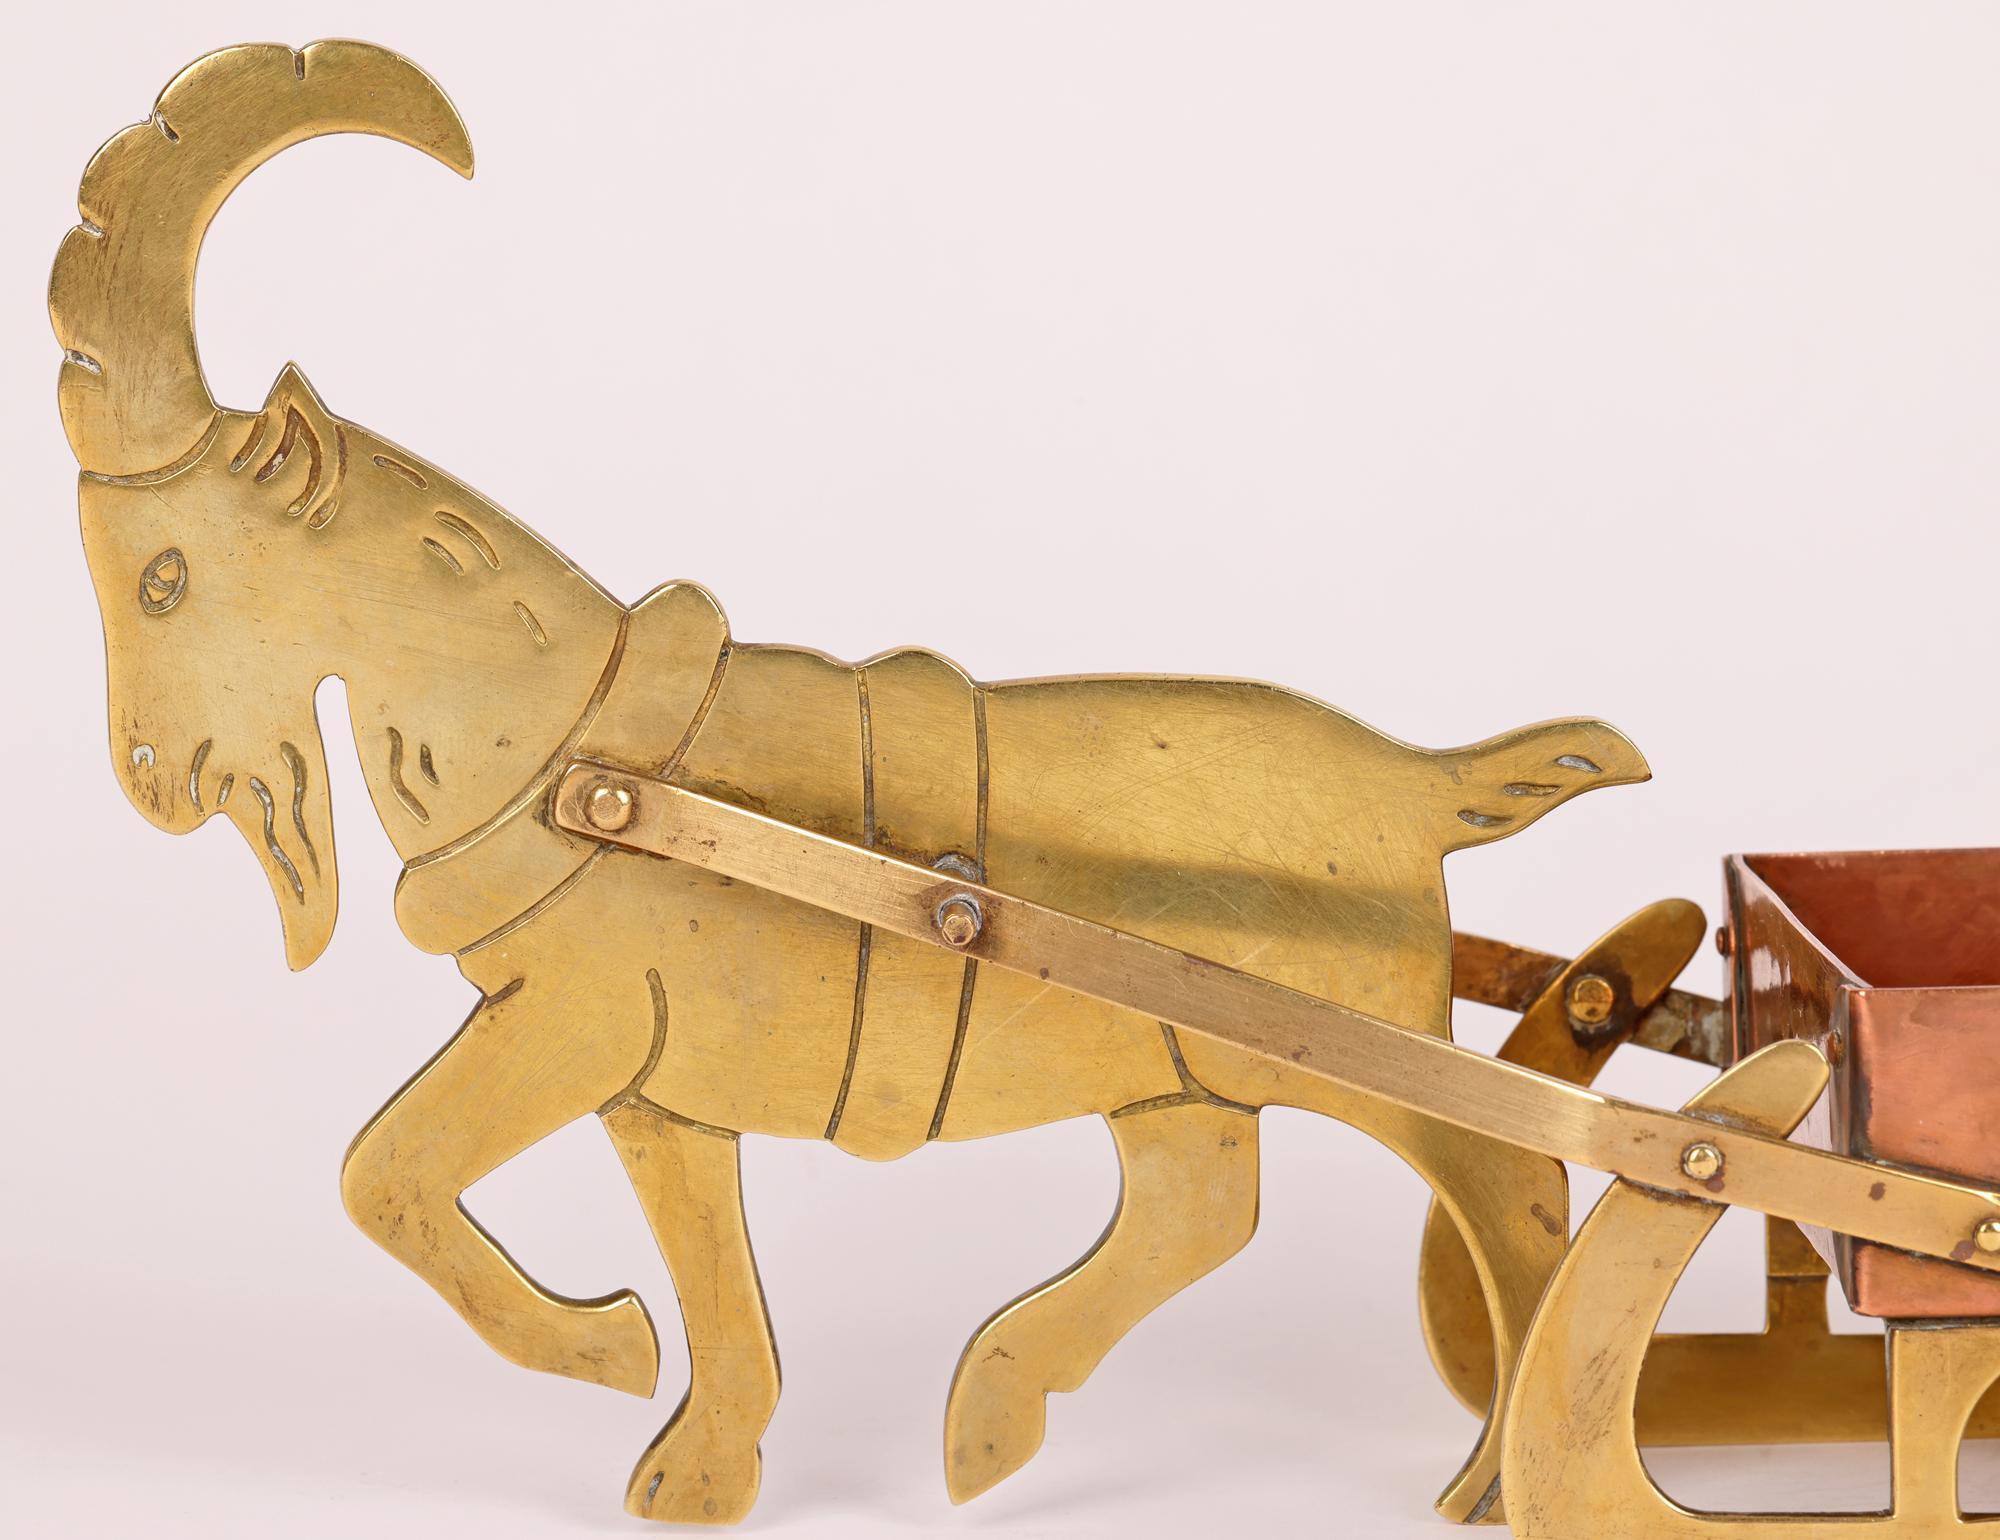 A rare and unusual German Jugendstil copper and brass smokers companion or candleholder formed as a goat pulling a sleigh the design attributed to renowned sculptor Ignatius Taschner (German, 1871-1913) for WMF (Württembergische Metallwarenfabrik)